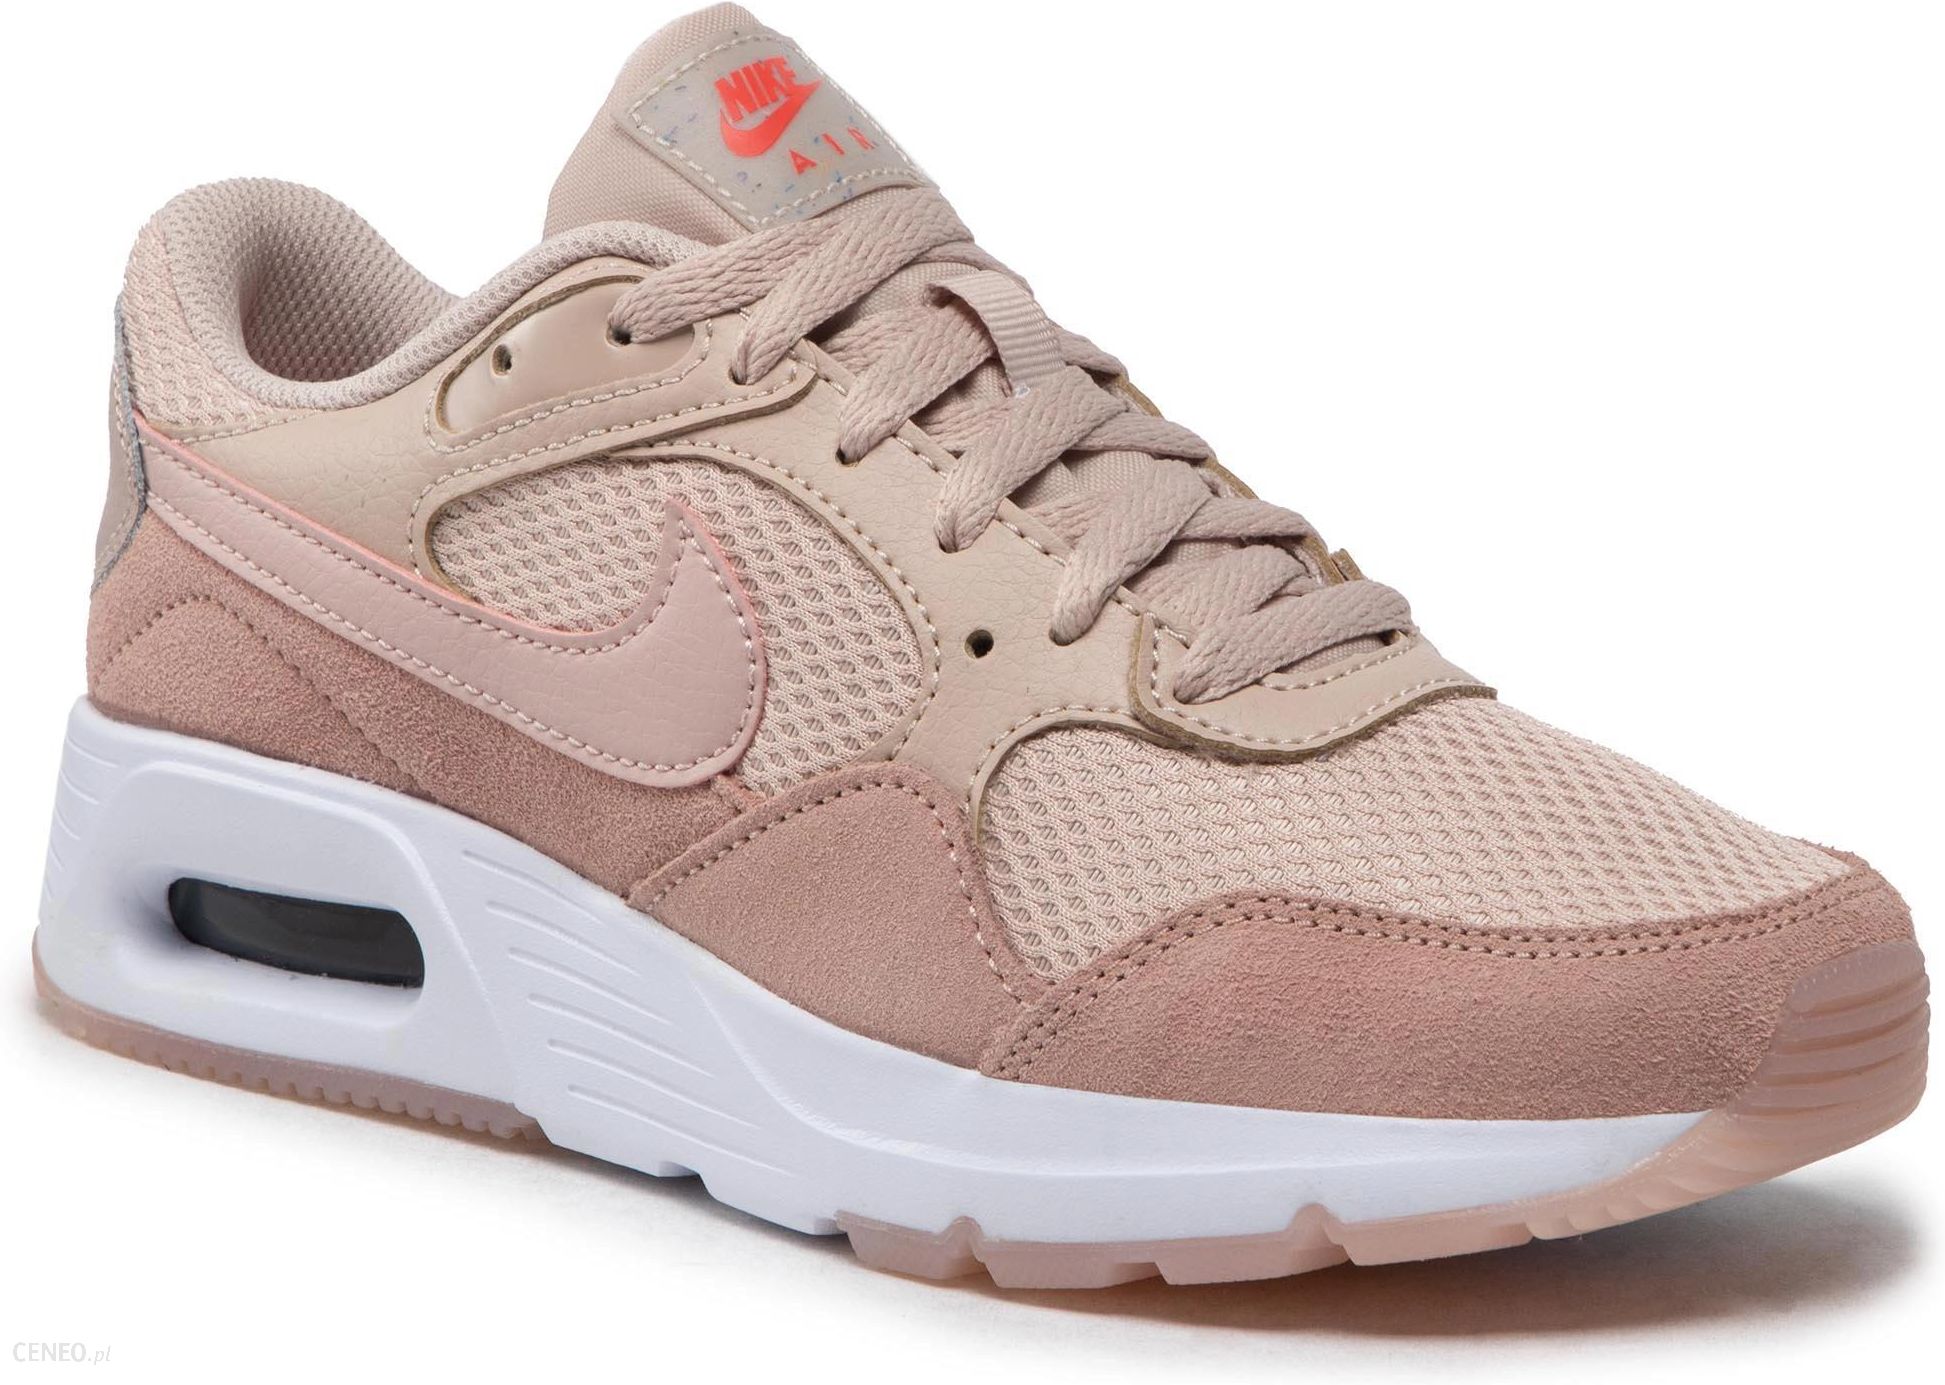 https://image.ceneostatic.pl/data/products/138158620/i-buty-nike-air-max-sc-cw4554-201-fossil-stone-pink-oxford.jpg